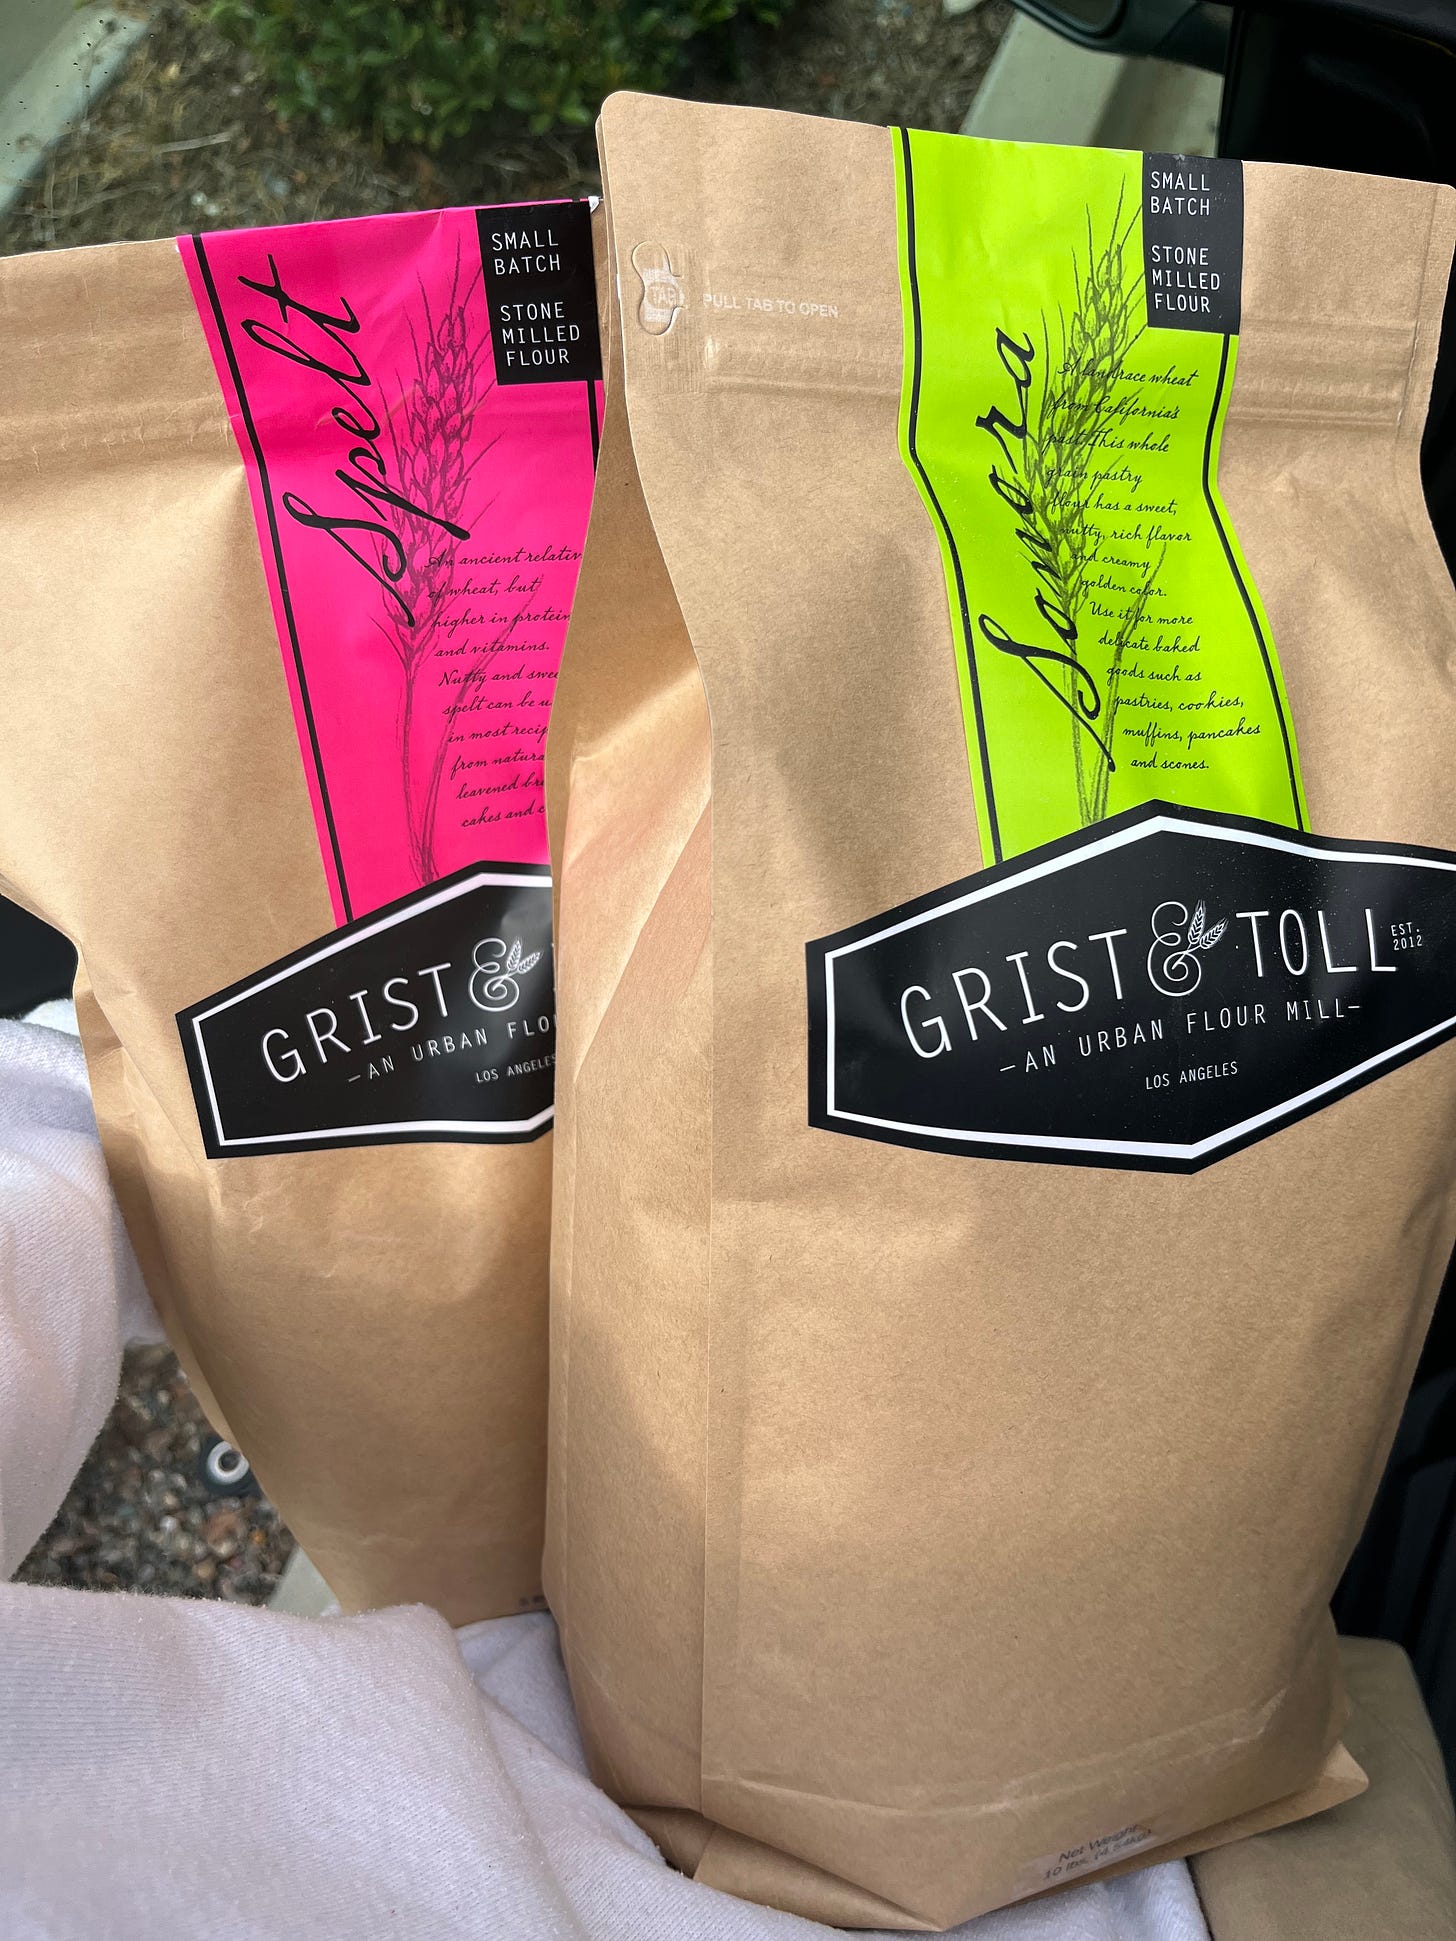 Image of two bags of Grist and Toll flour, one Spelt one Sonora.